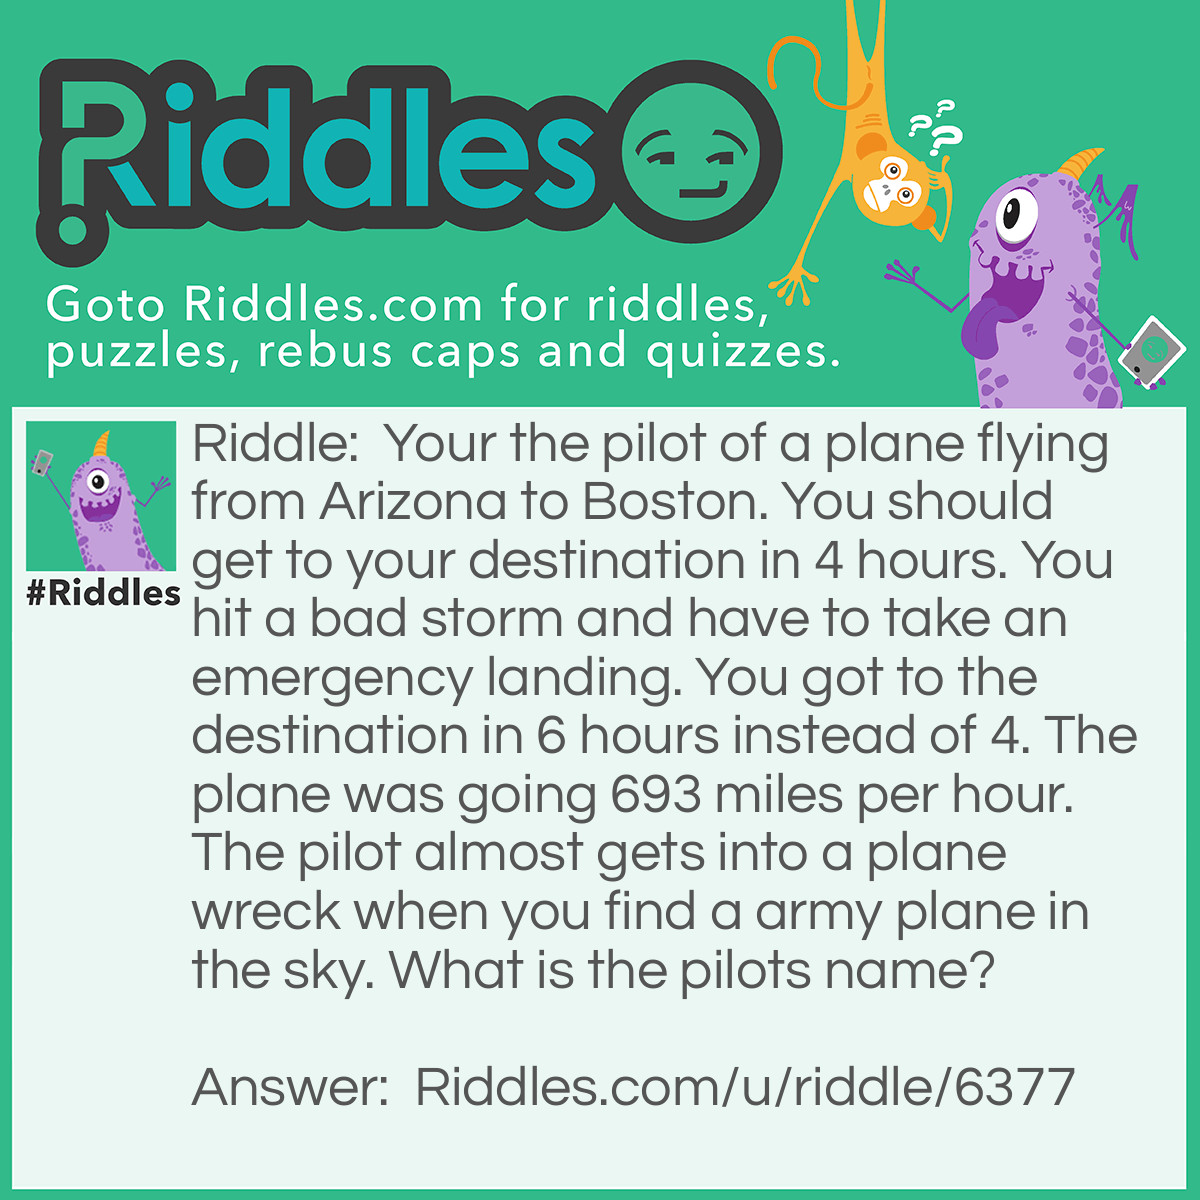 Riddle: Your the pilot of a plane flying from Arizona to Boston. You should get to your destination in 4 hours. You hit a bad storm and have to take an emergency landing. You got to the destination in 6 hours instead of 4. The plane was going 693 miles per hour. The pilot almost gets into a plane wreck when you find a army plane in the sky. What is the pilots name? Answer: Your the pilot of the plane! Reread the first sentence.